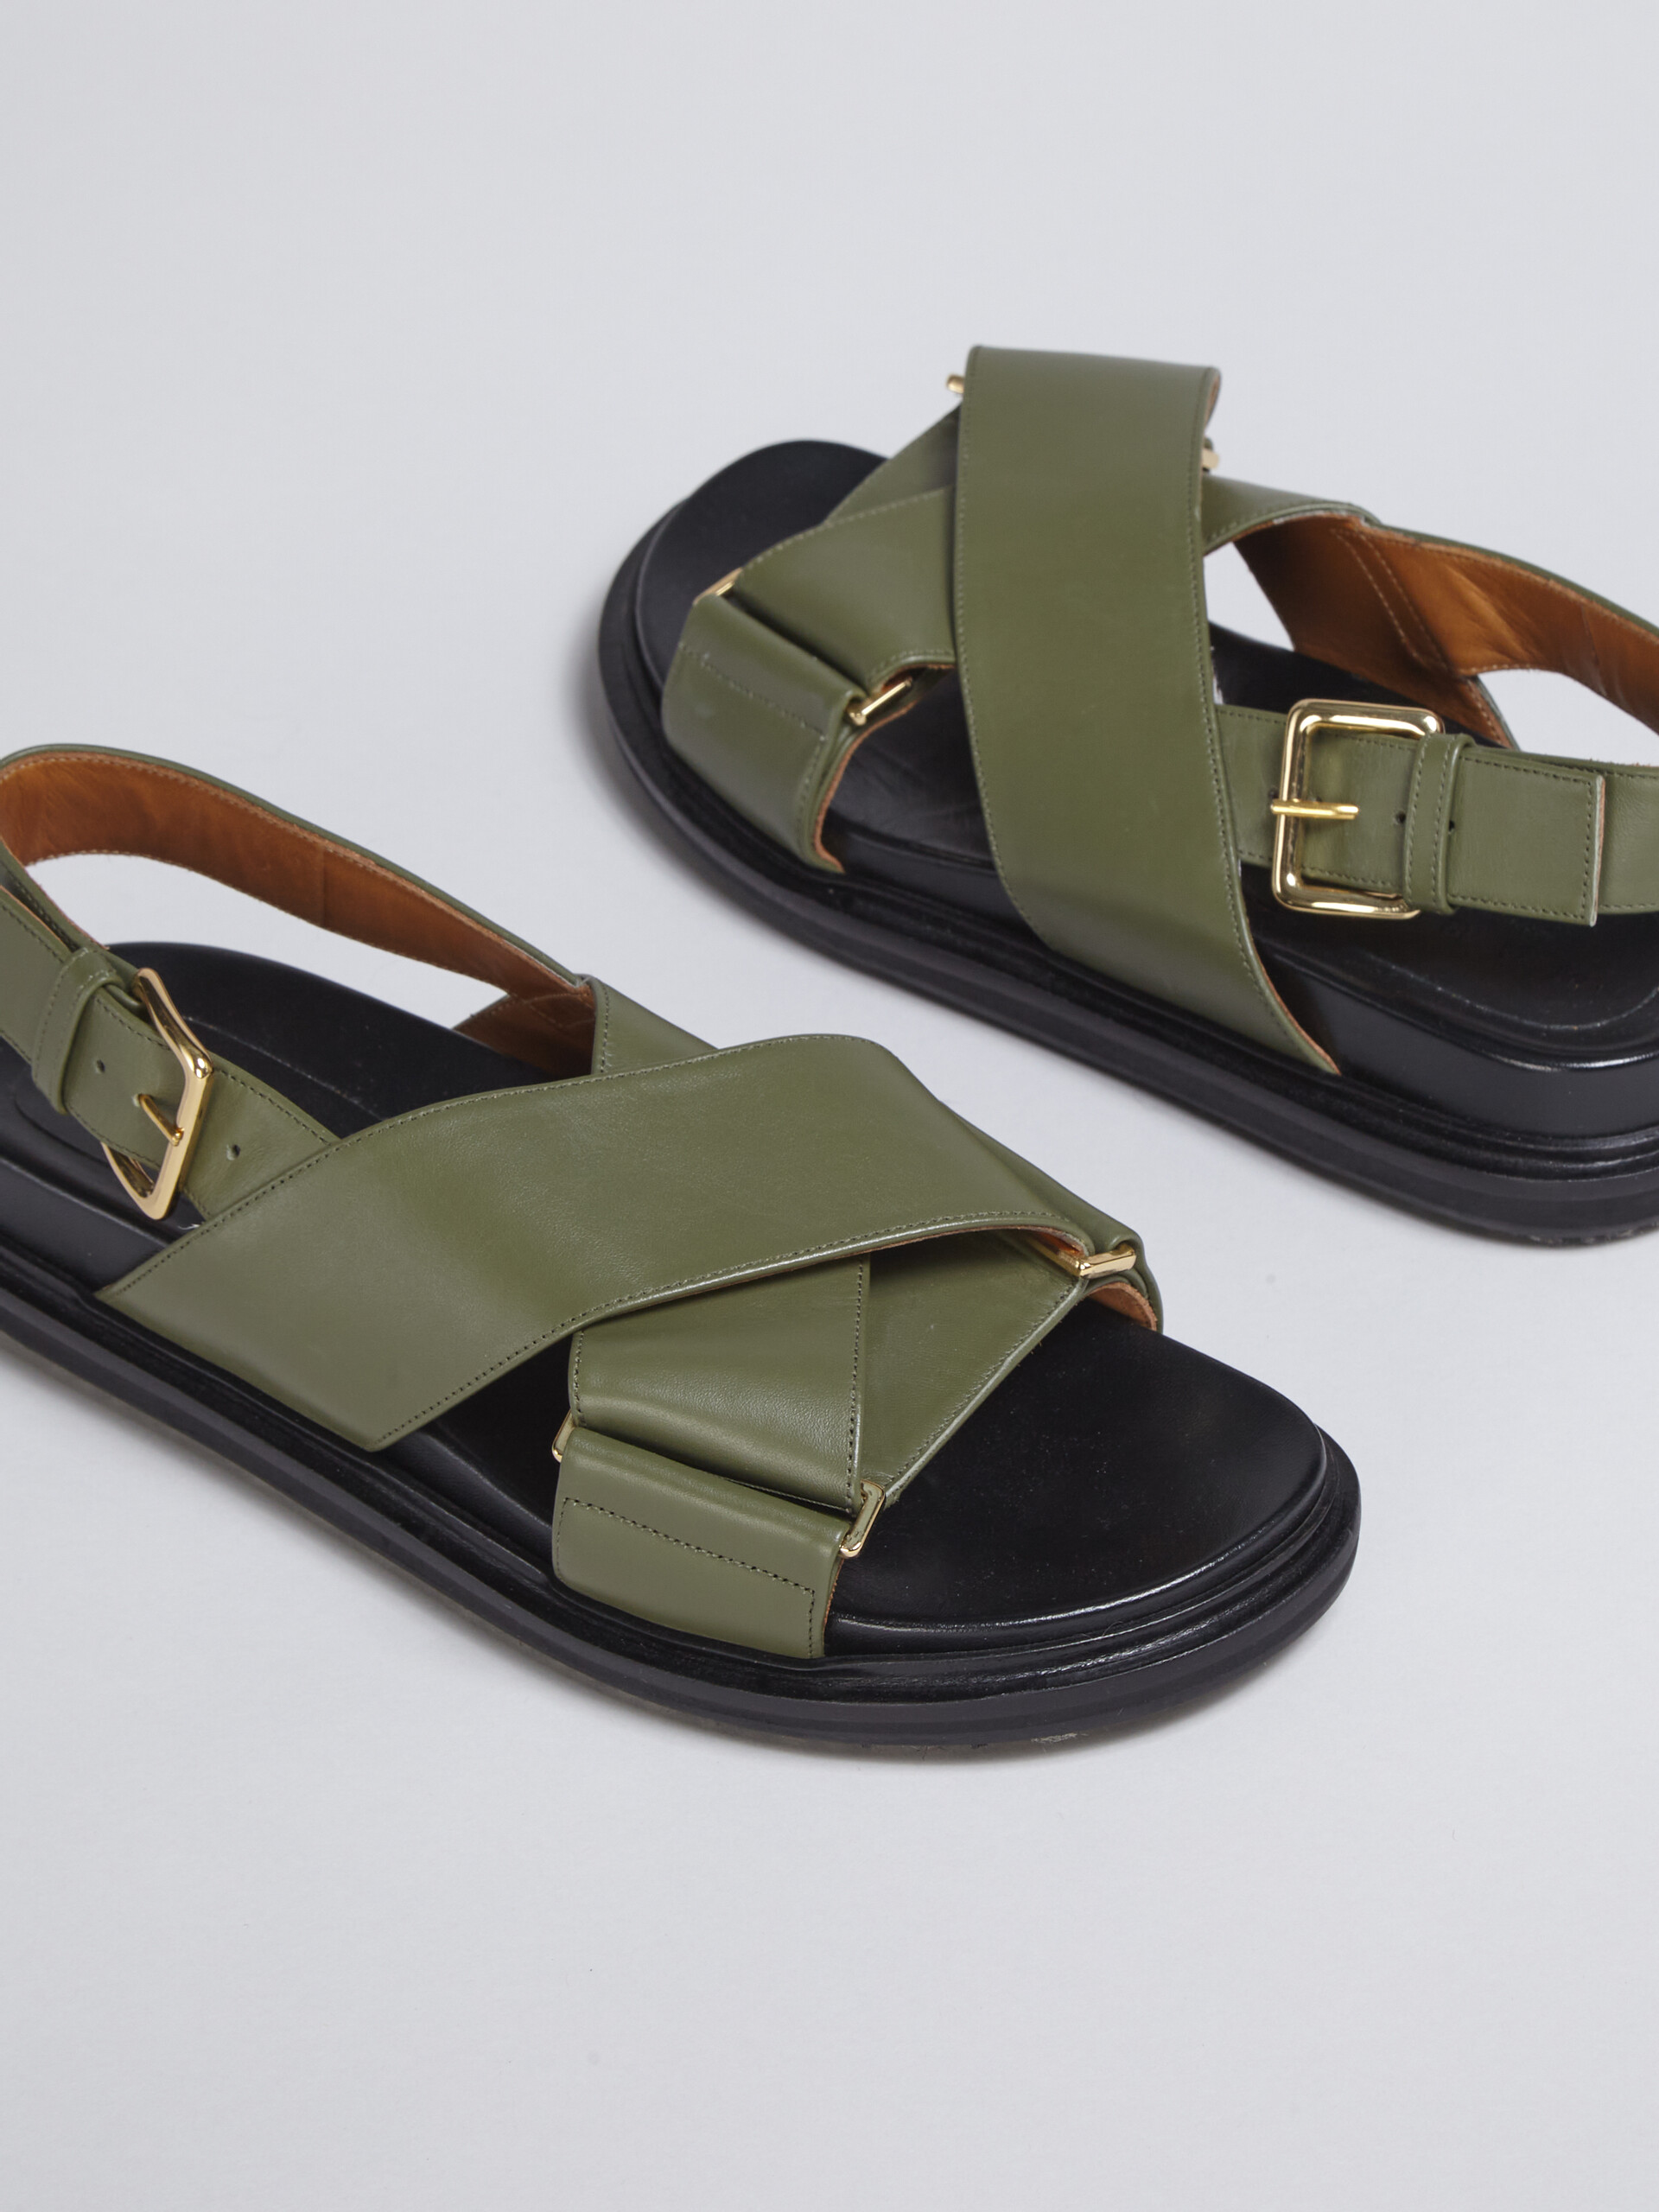 Green smooth calf leather fussbett - Sandals - Image 5